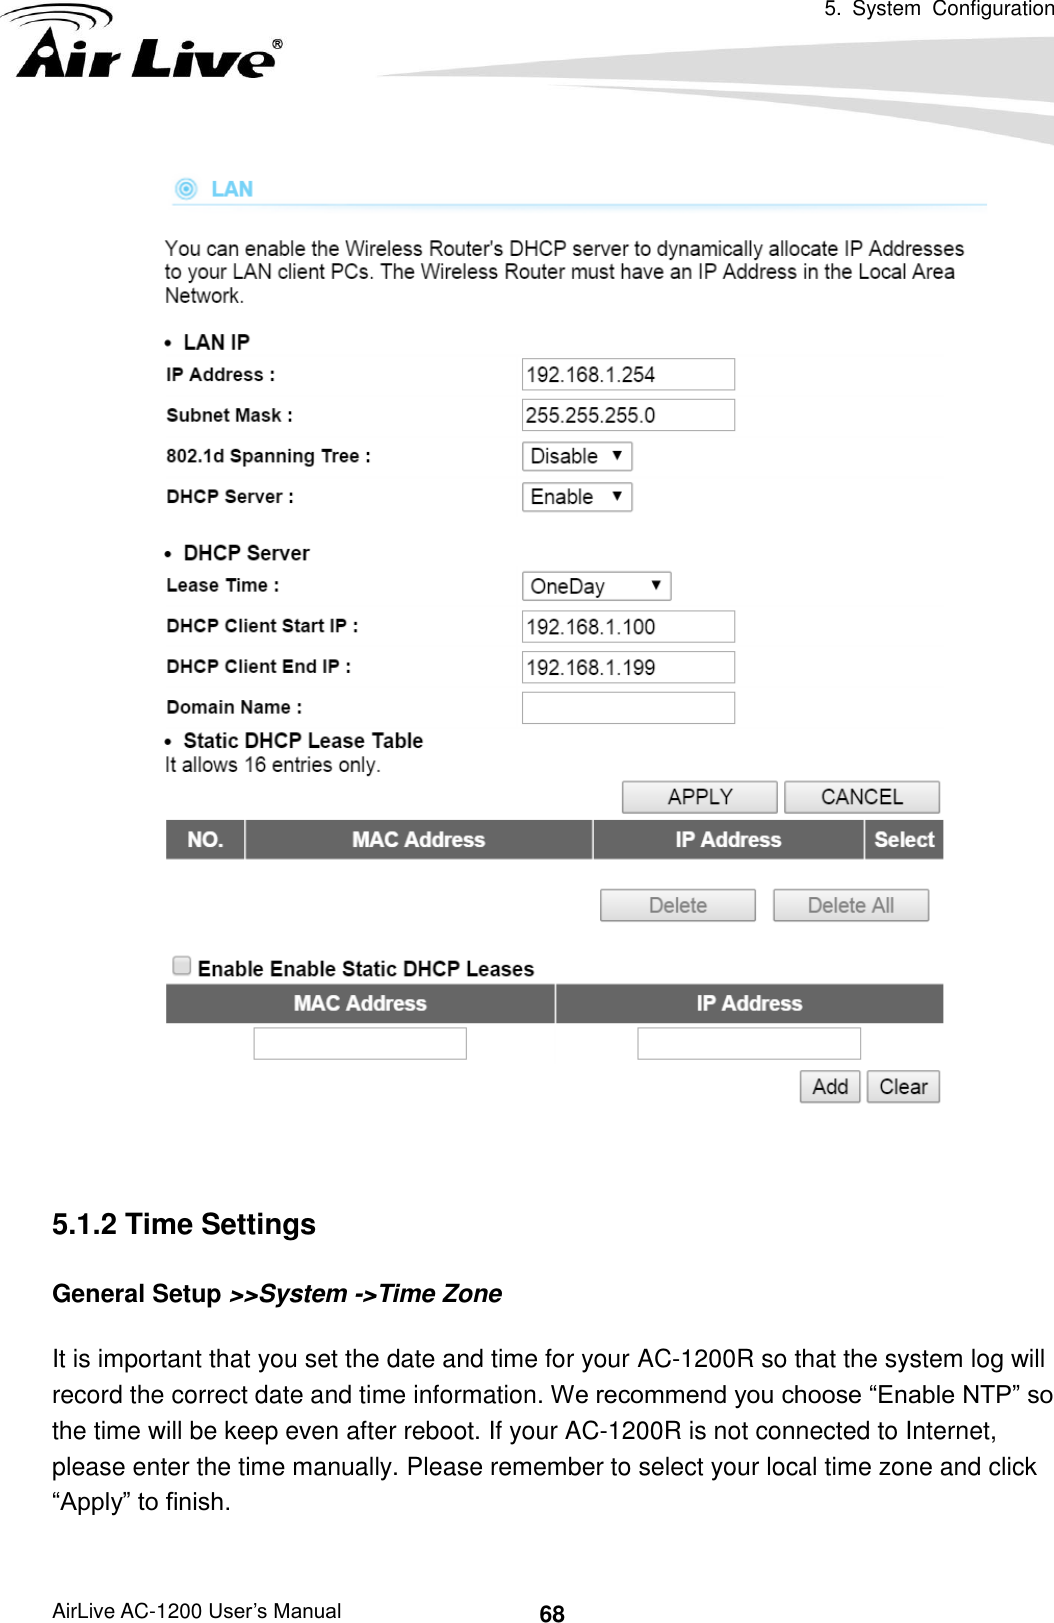   5.  System  Configuration AirLive AC-1200 User’s Manual 68     5.1.2 Time Settings General Setup &gt;&gt;System -&gt;Time Zone It is important that you set the date and time for your AC-1200R so that the system log will record the correct date and time information. We recommend you choose “Enable NTP” so the time will be keep even after reboot. If your AC-1200R is not connected to Internet, please enter the time manually. Please remember to select your local time zone and click “Apply” to finish. 